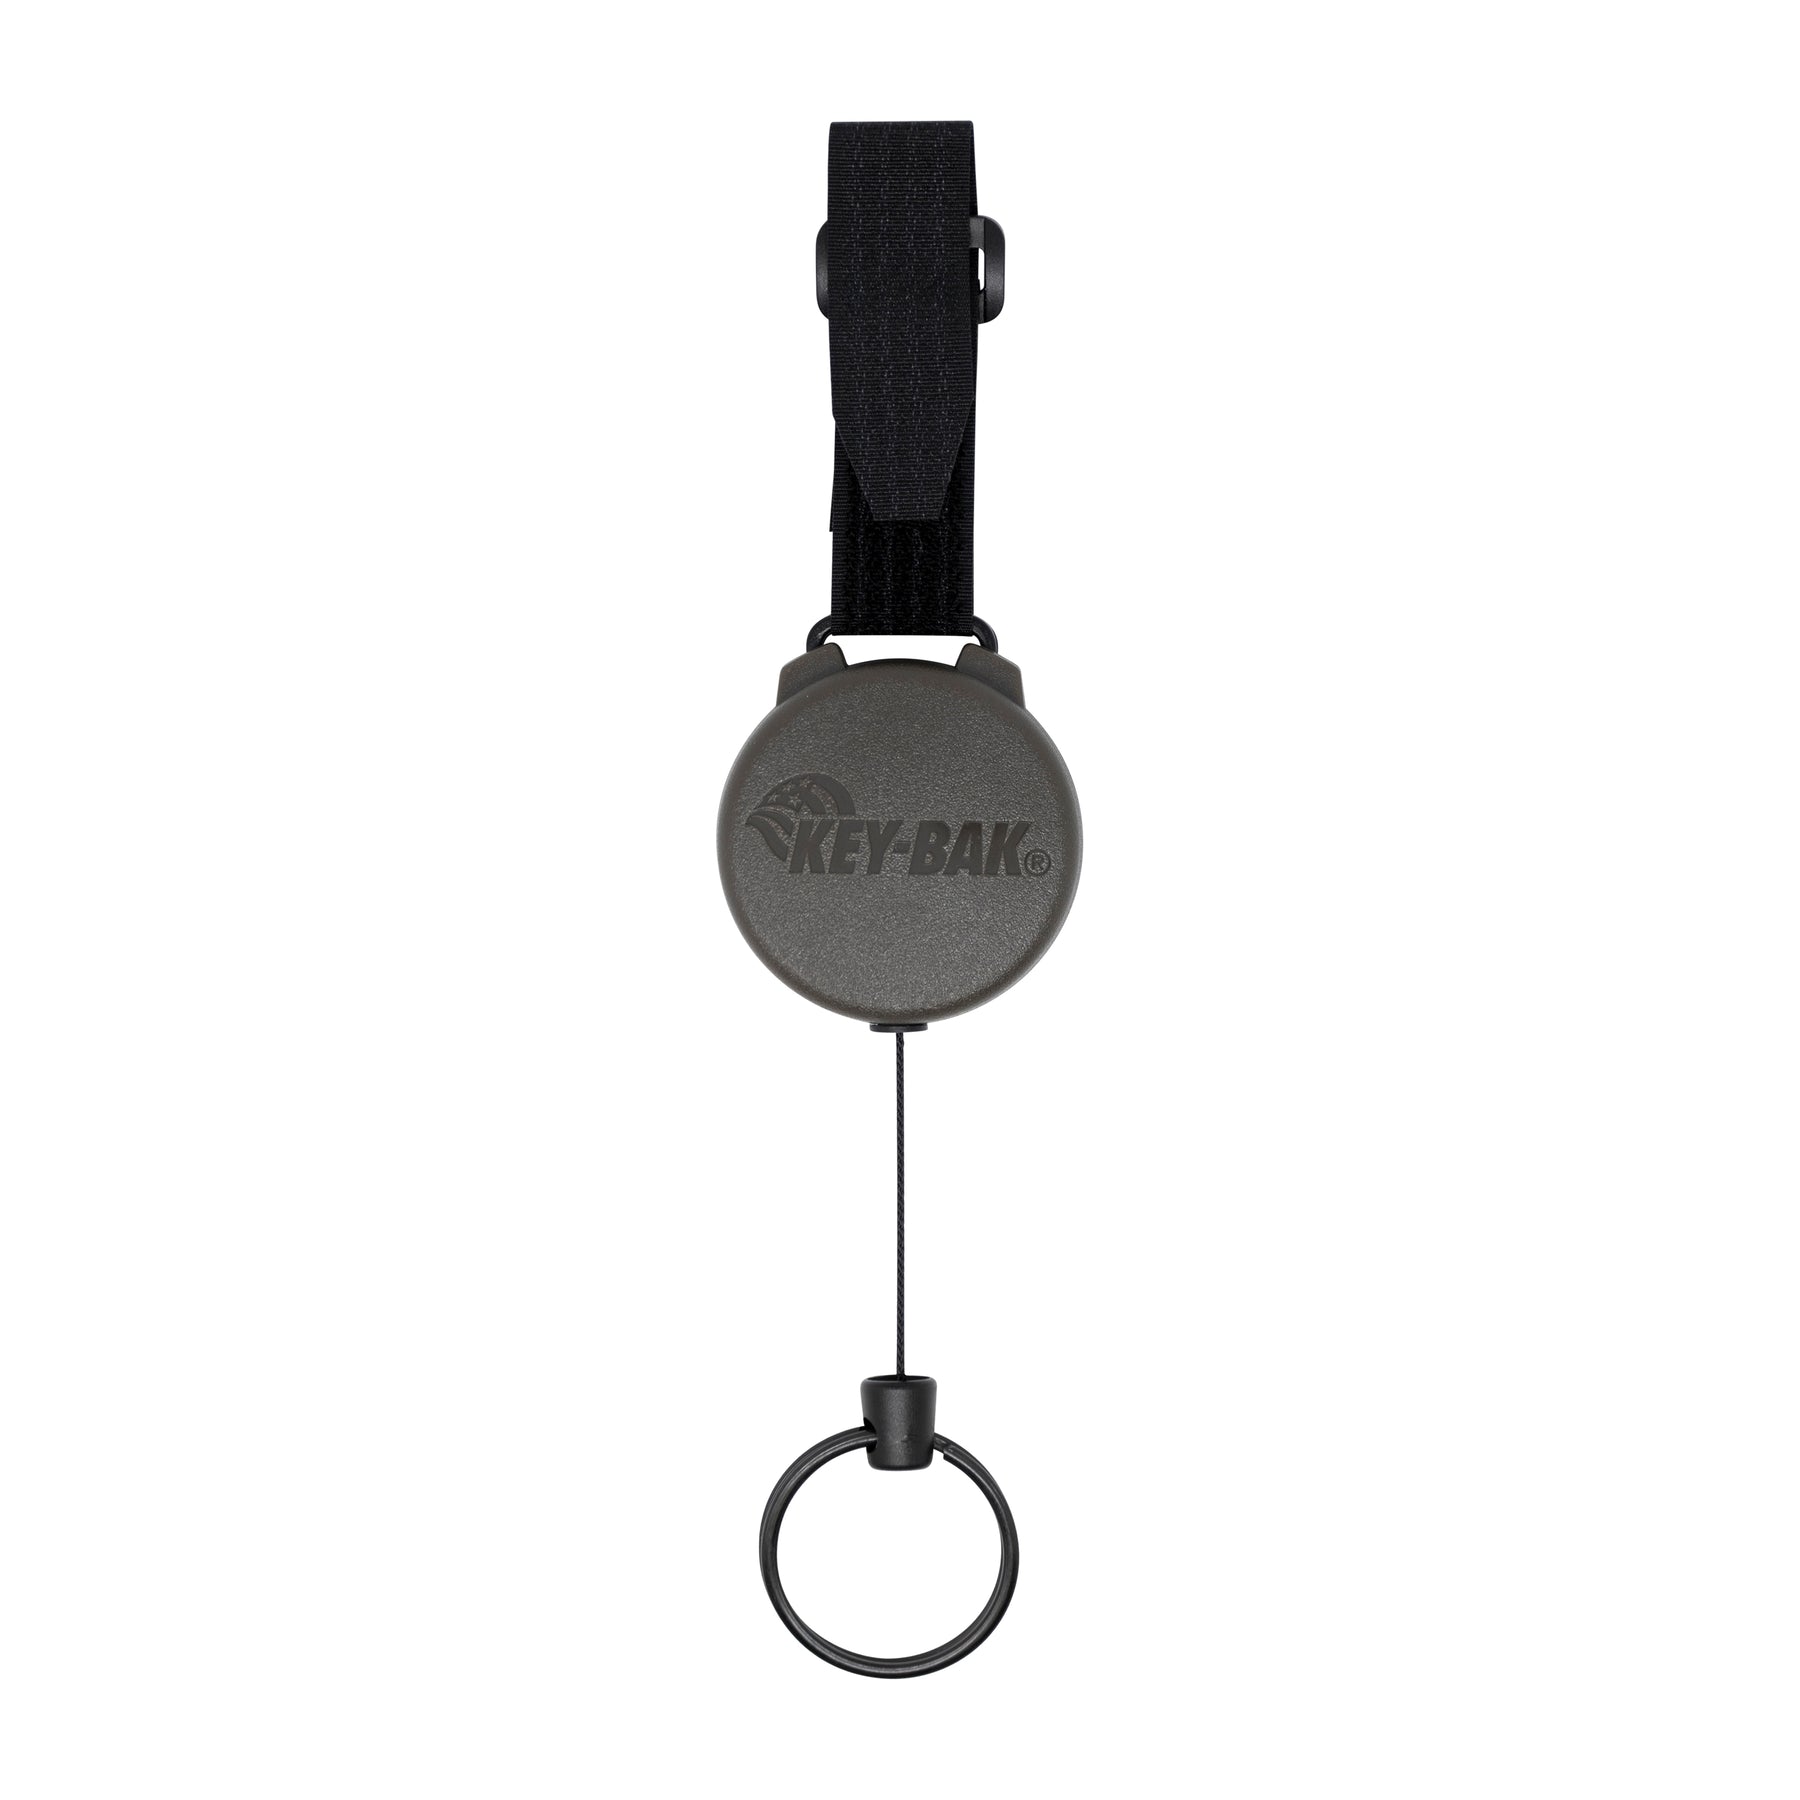 Shop for and Buy Key-Bak Ratch-It Retractable Ratcheting Tether with Belt  Clip at . Large selection and bulk discounts available.